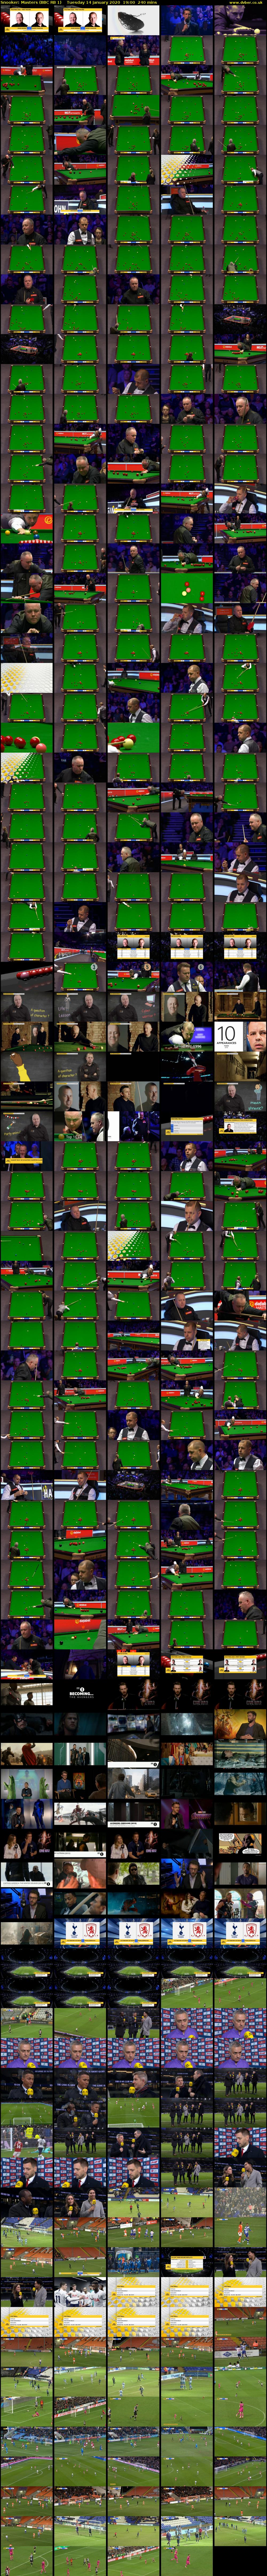 Snooker: Masters (BBC RB 1) Tuesday 14 January 2020 19:00 - 23:00